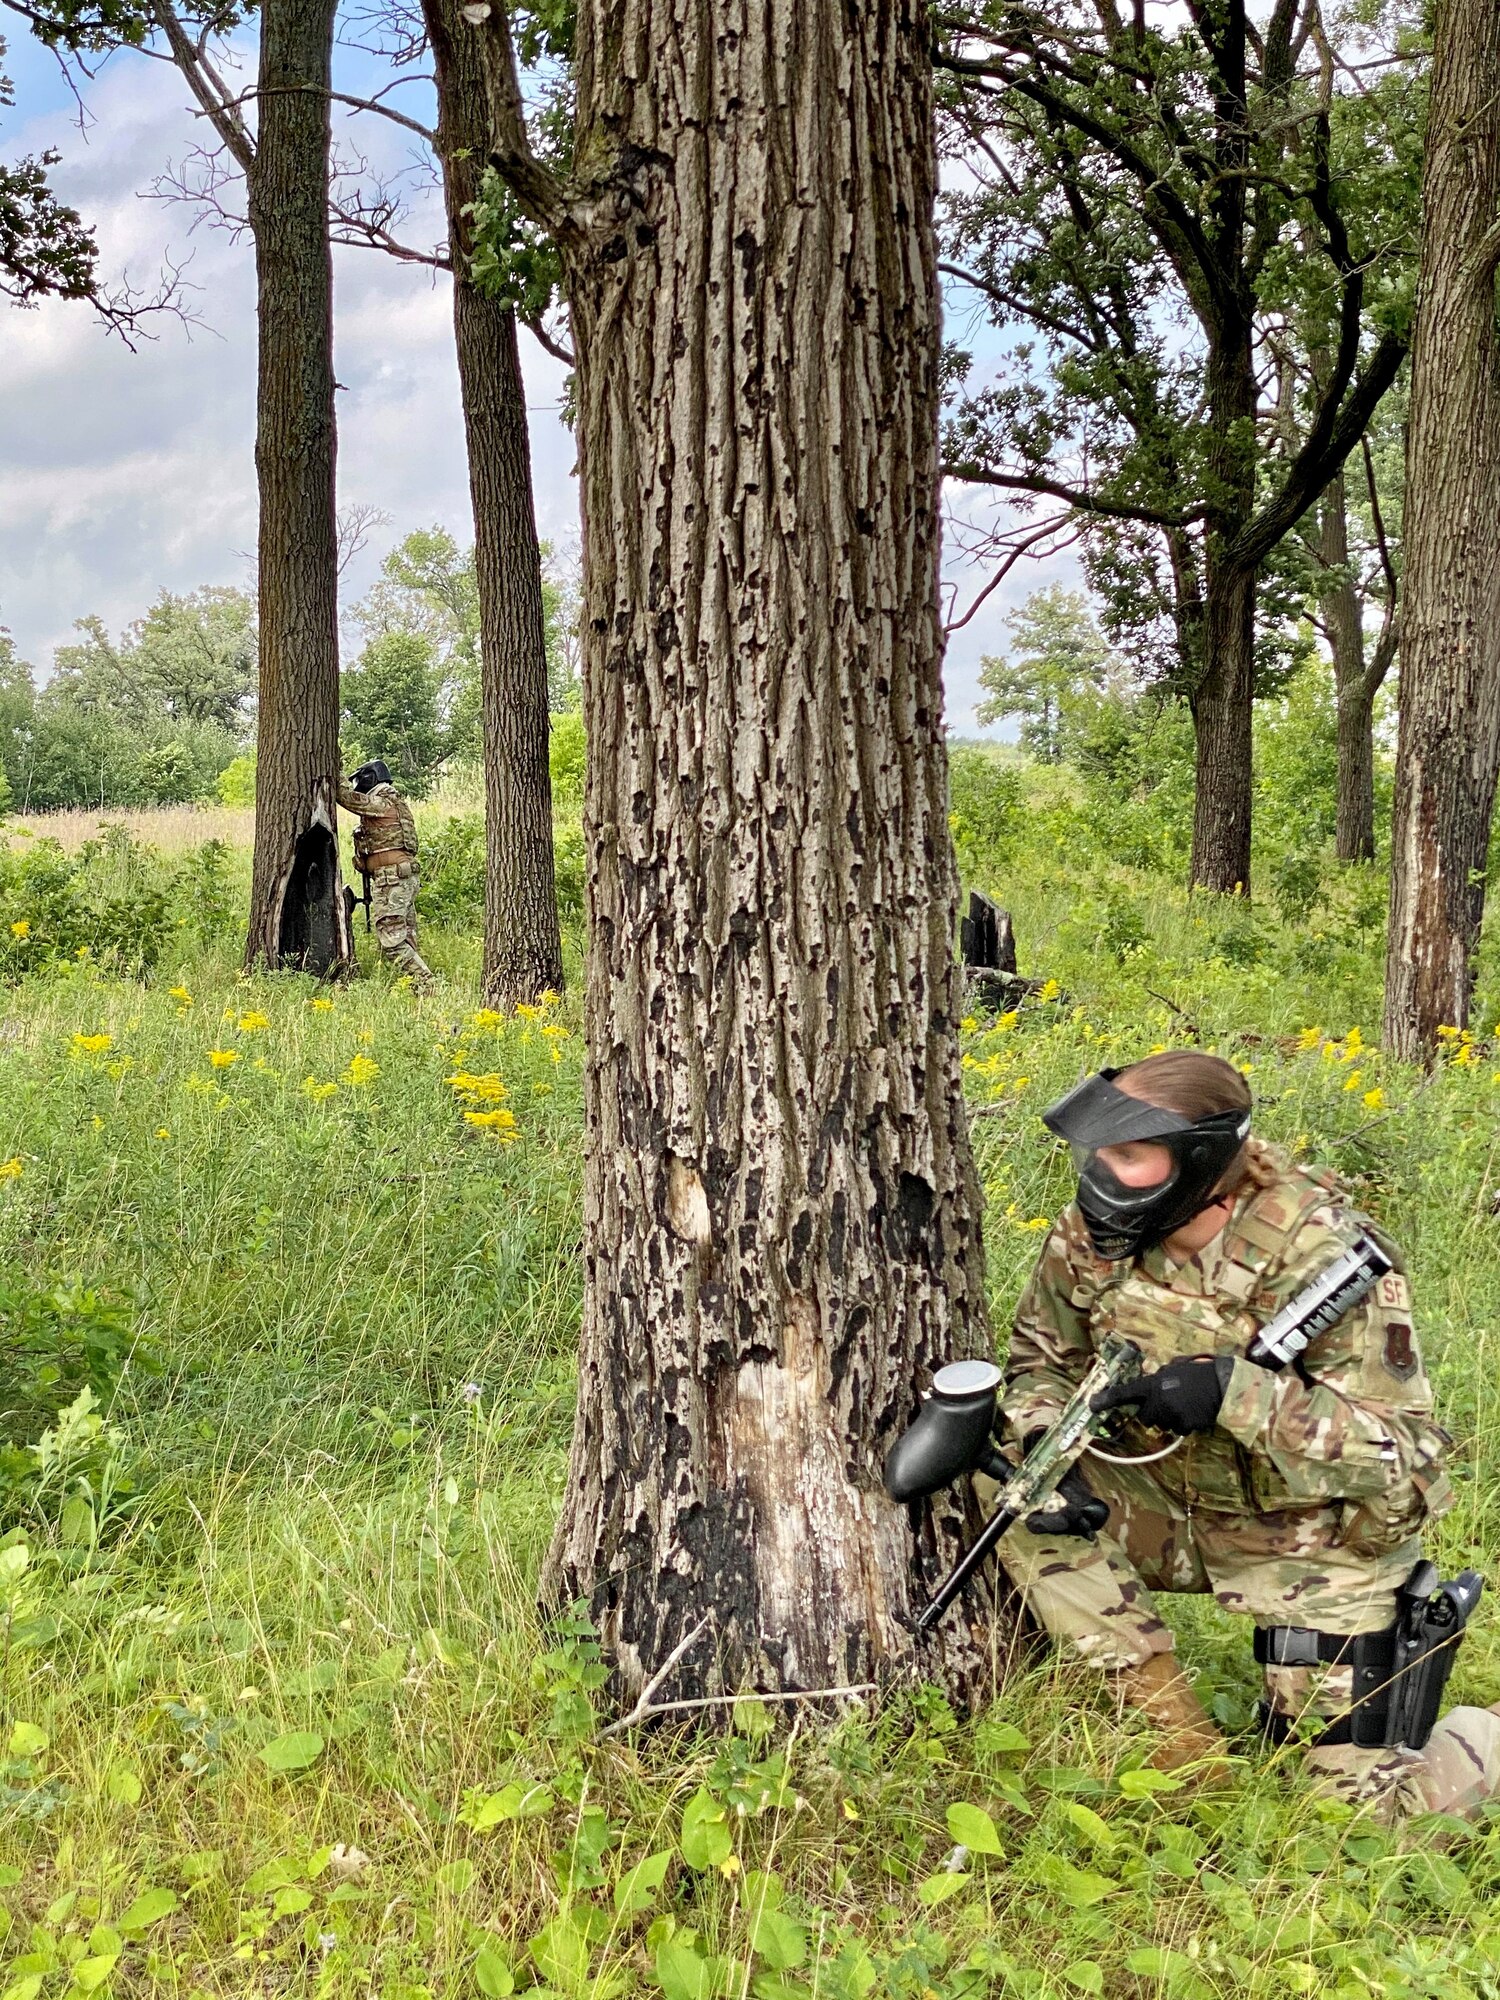 Airmen from the 148th Security Forces Squadron participate in a field training exercise (FTX) at Camp Ripley Training Center, Minnesota on August 13, 2020.